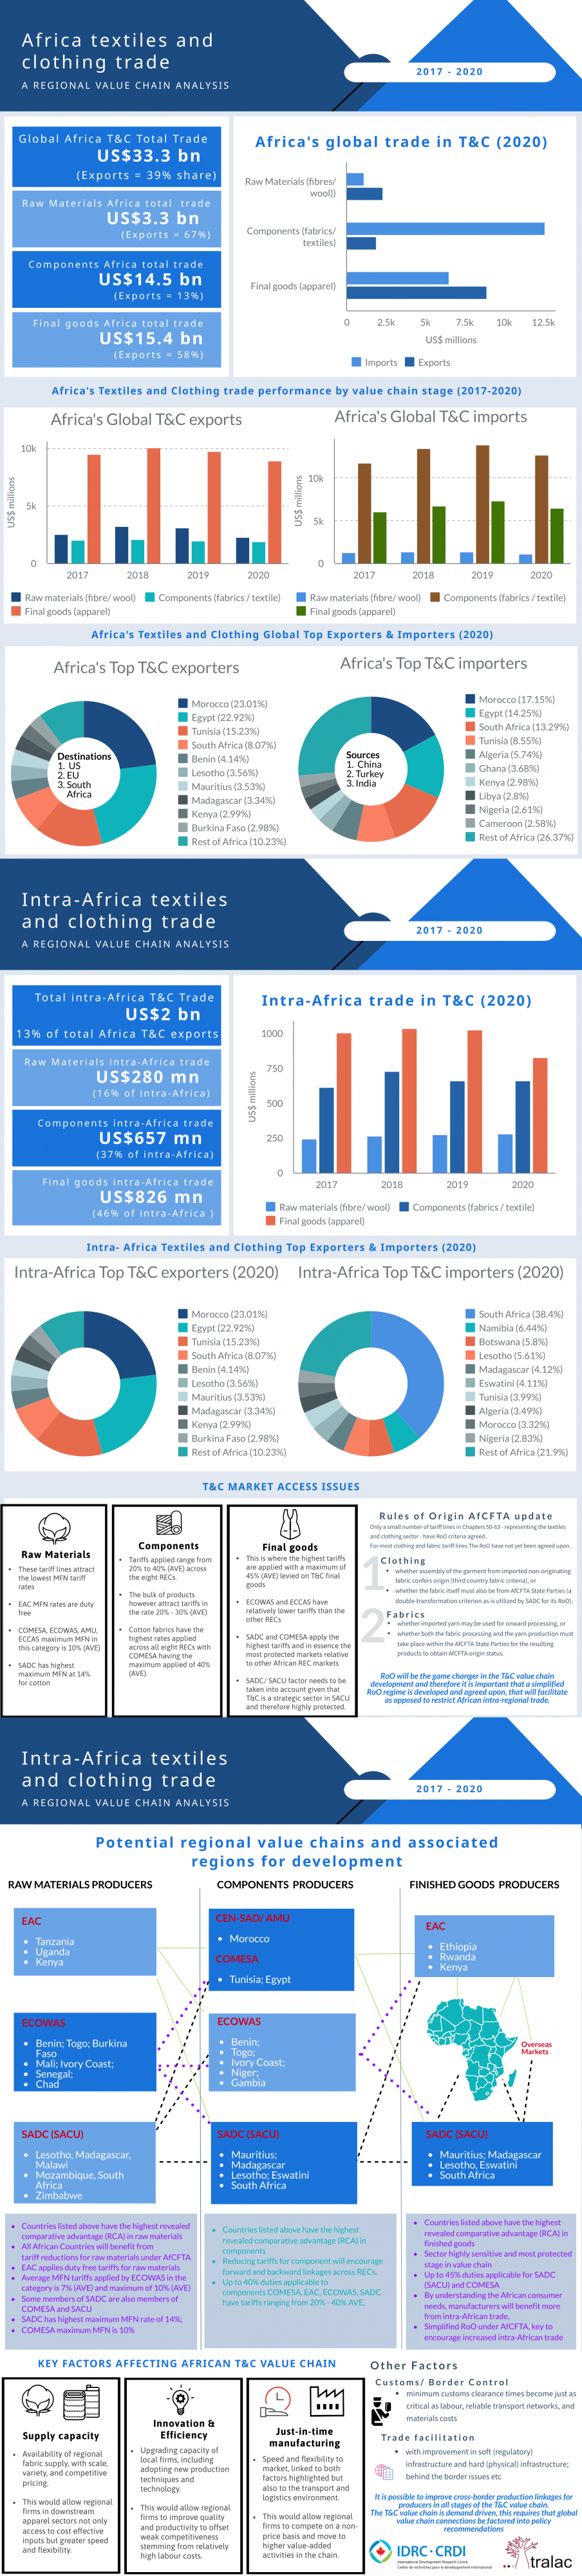 Africa textiles and clothing trade: A regional value chain analysis